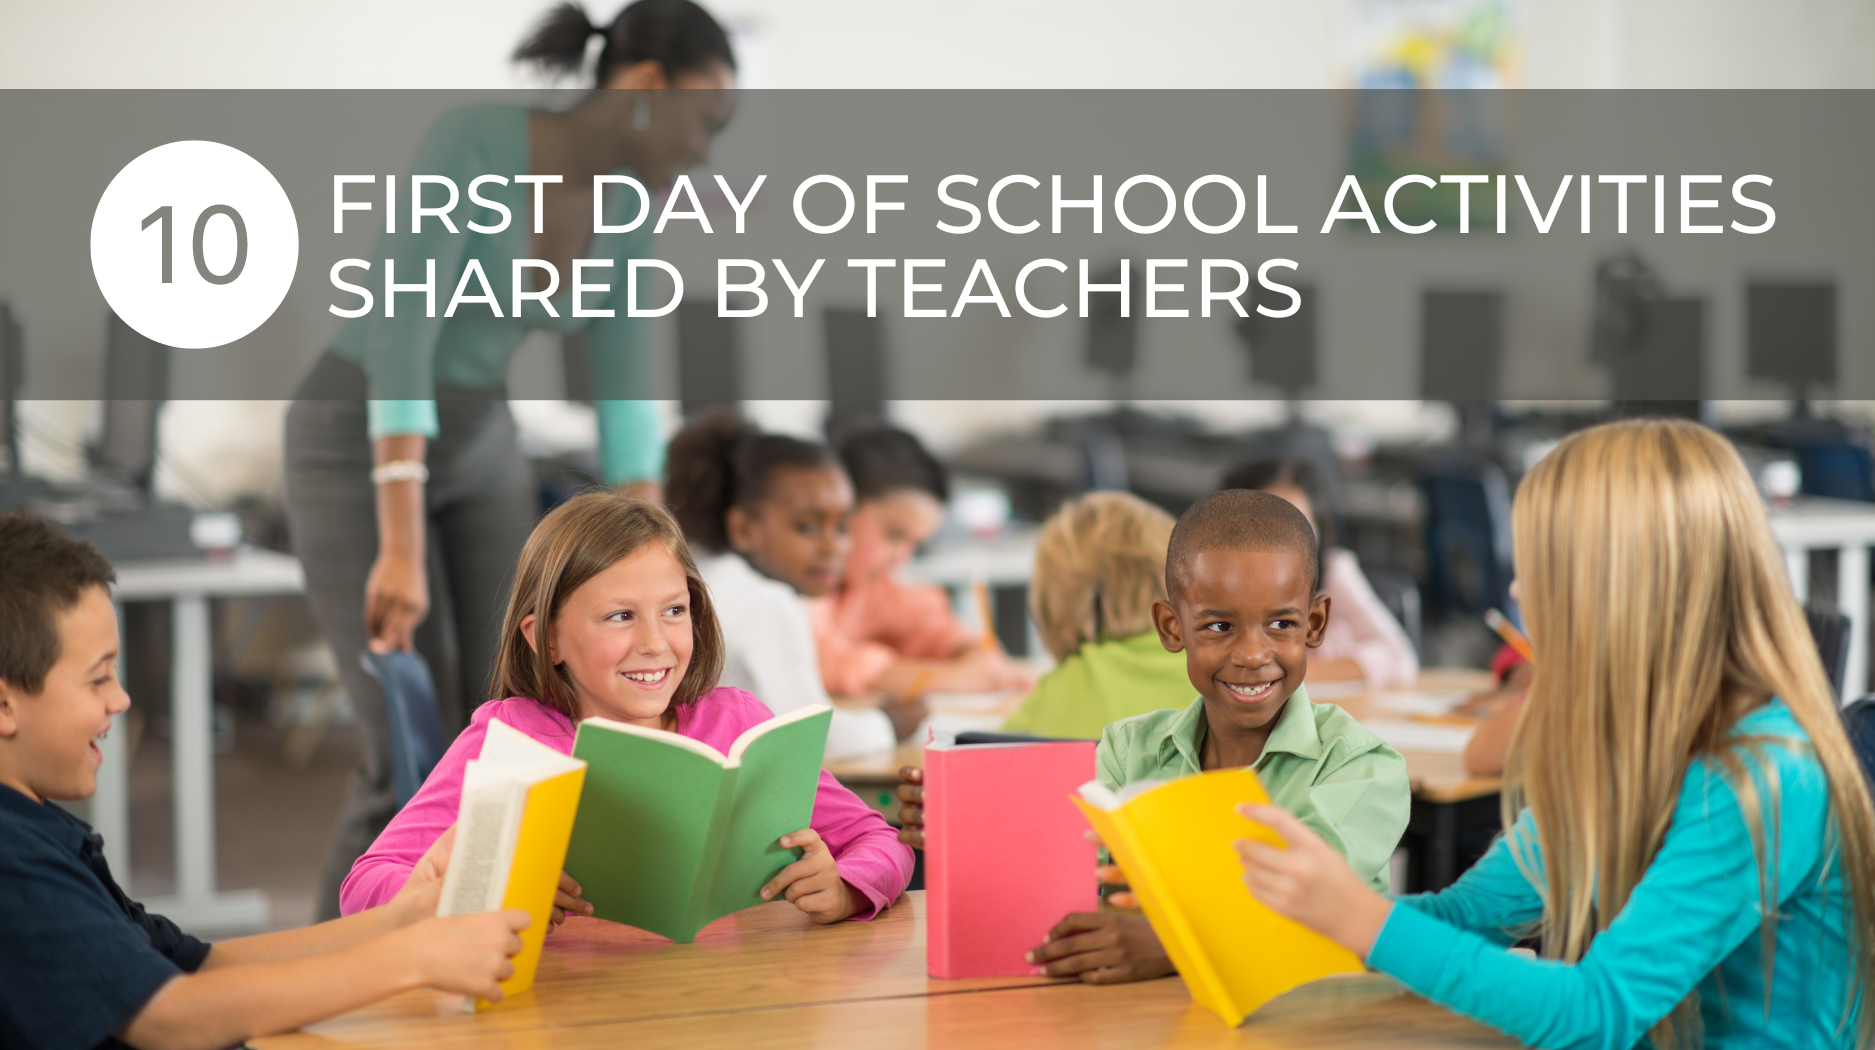 10-first-day-of-school-activities-shared-by-teachers-technotes-blog